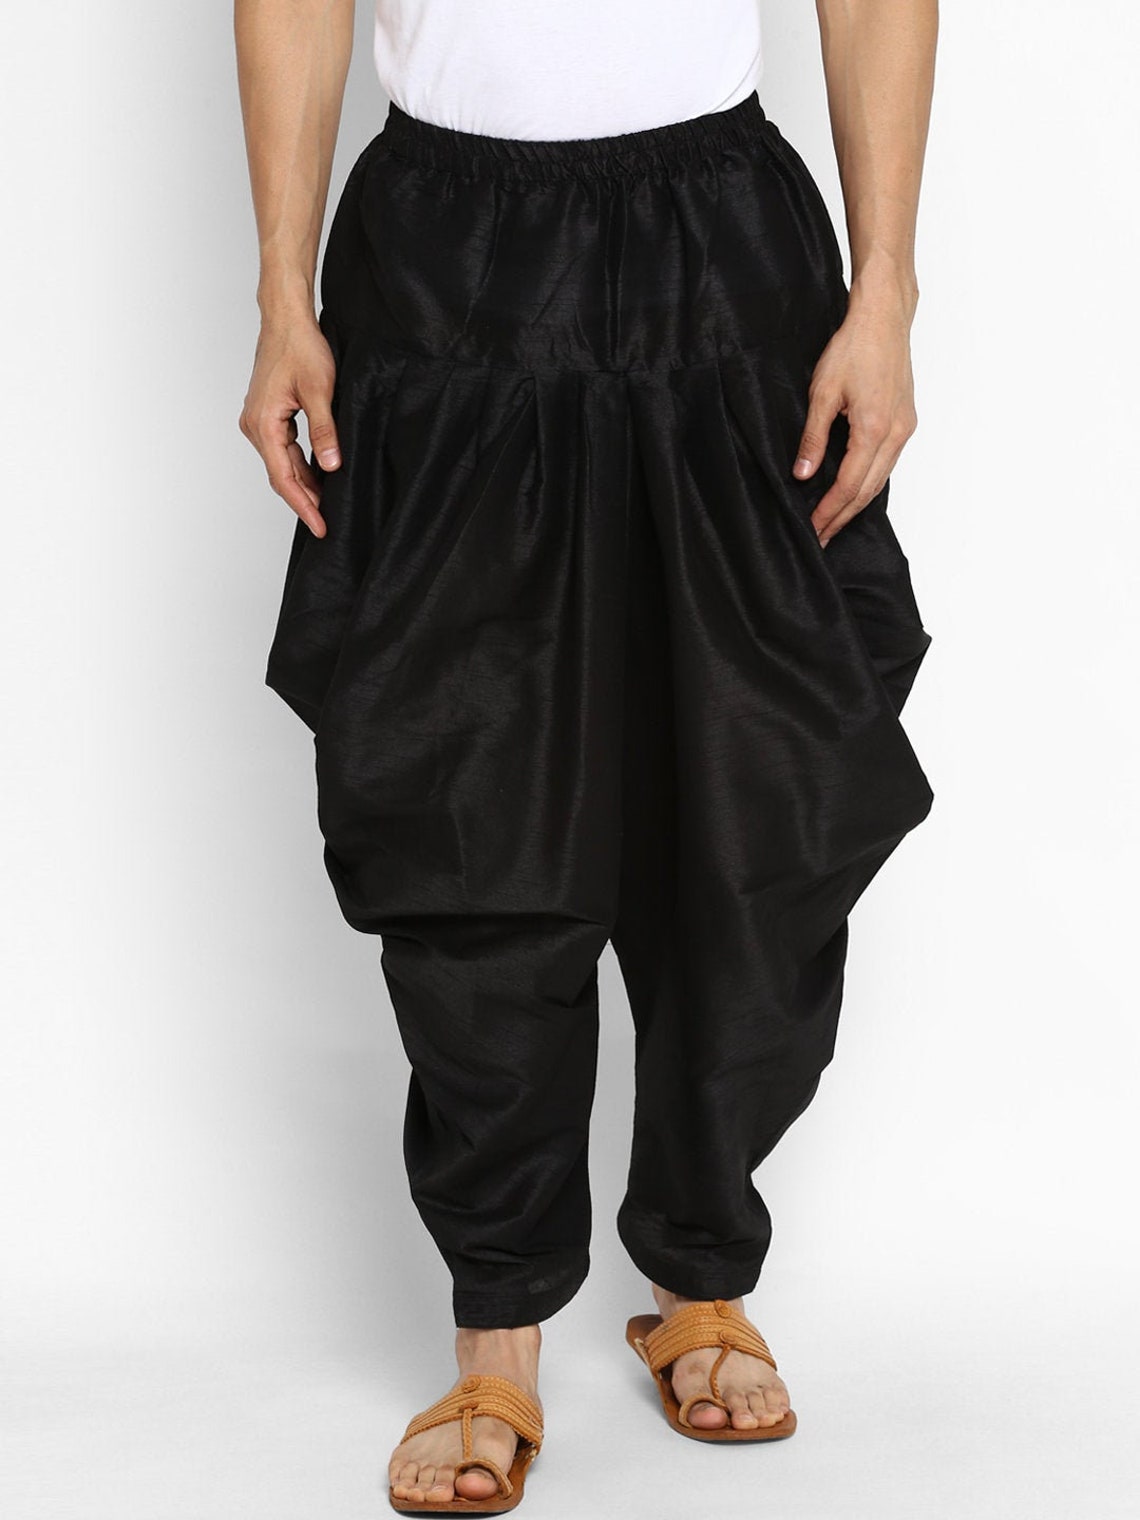 Patiala Dhoti Pants Indian Clothing in Denver, CO, Aurora, CO, Boulder, CO, Fort Collins, CO, Colorado Springs, CO, Parker, CO, Highlands Ranch, CO, Cherry Creek, CO, Centennial, CO, and Longmont, CO. NATIONWIDE SHIPPING USA- India Fashion X